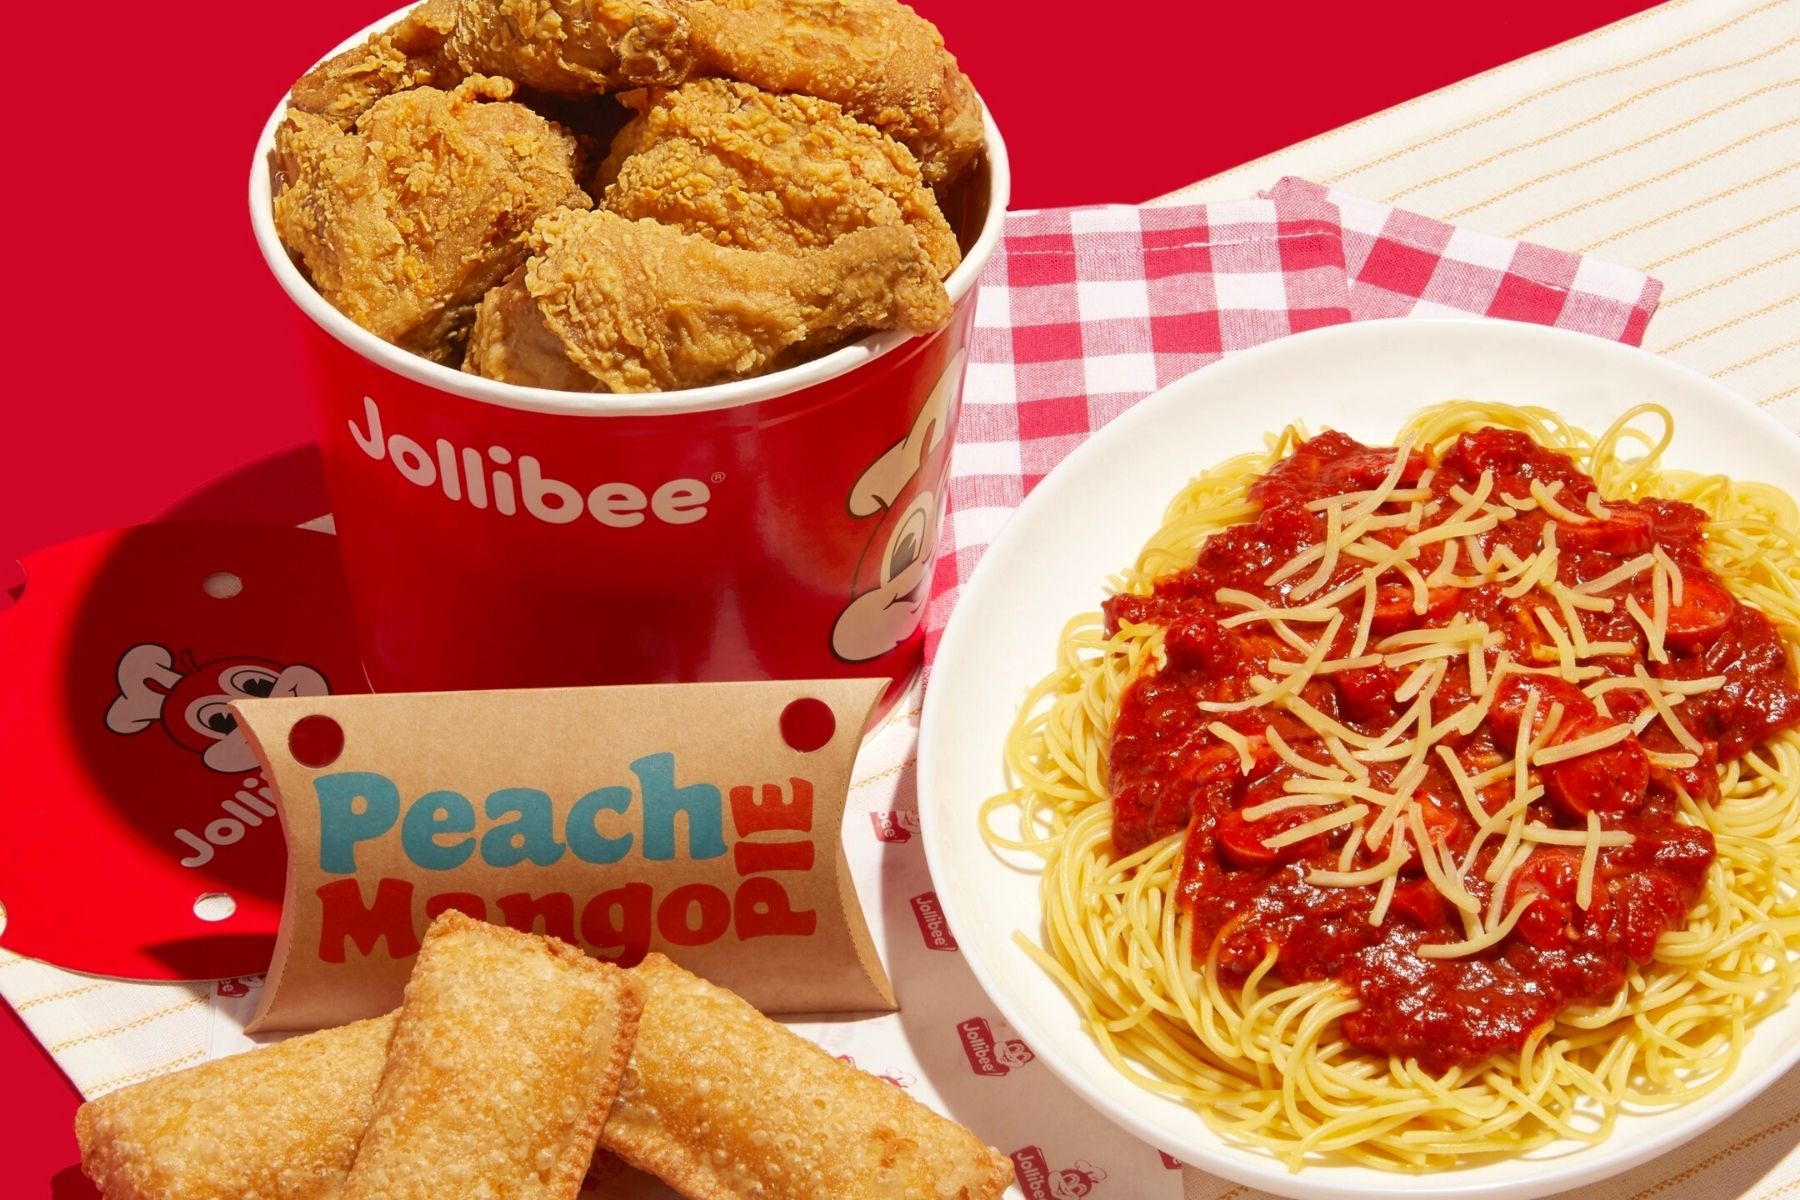 Fast-food spread from Jollibee with a bucket of Chickenjoy fried chicken, mango peach hand pies, and a plate of spaghetti.